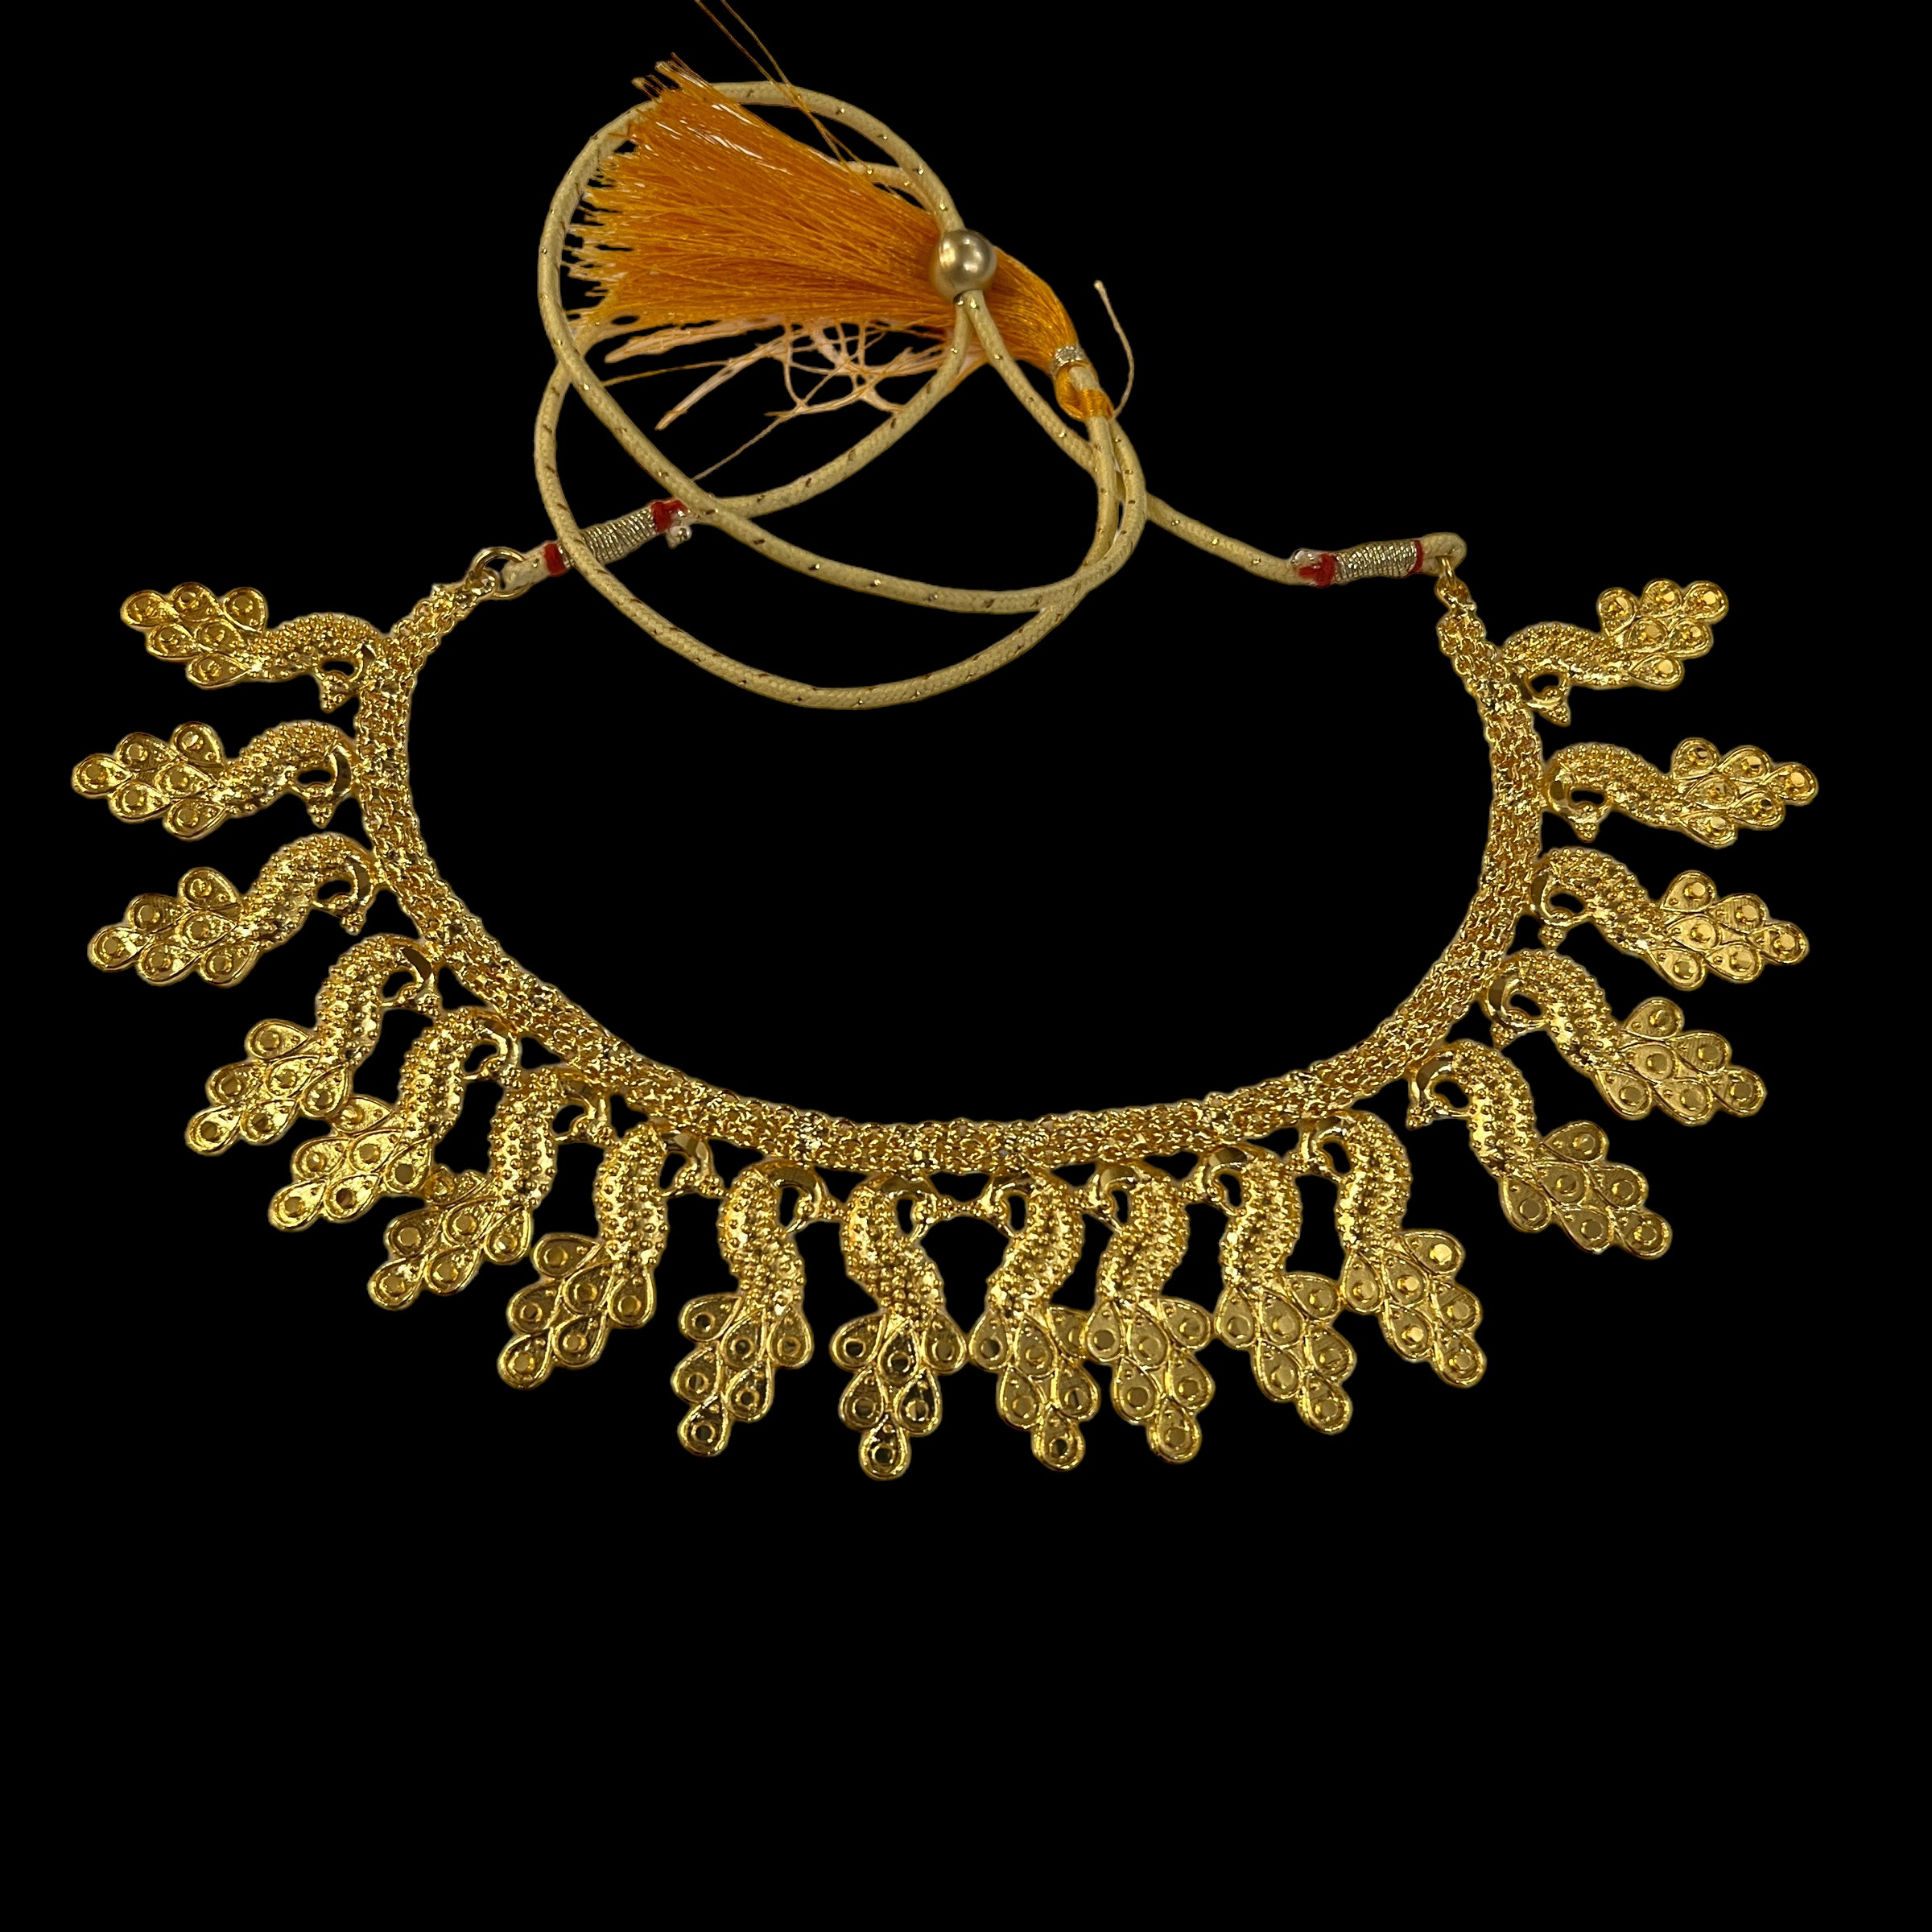 Gold Plated Peacock Neckalce - Vintage India NYC